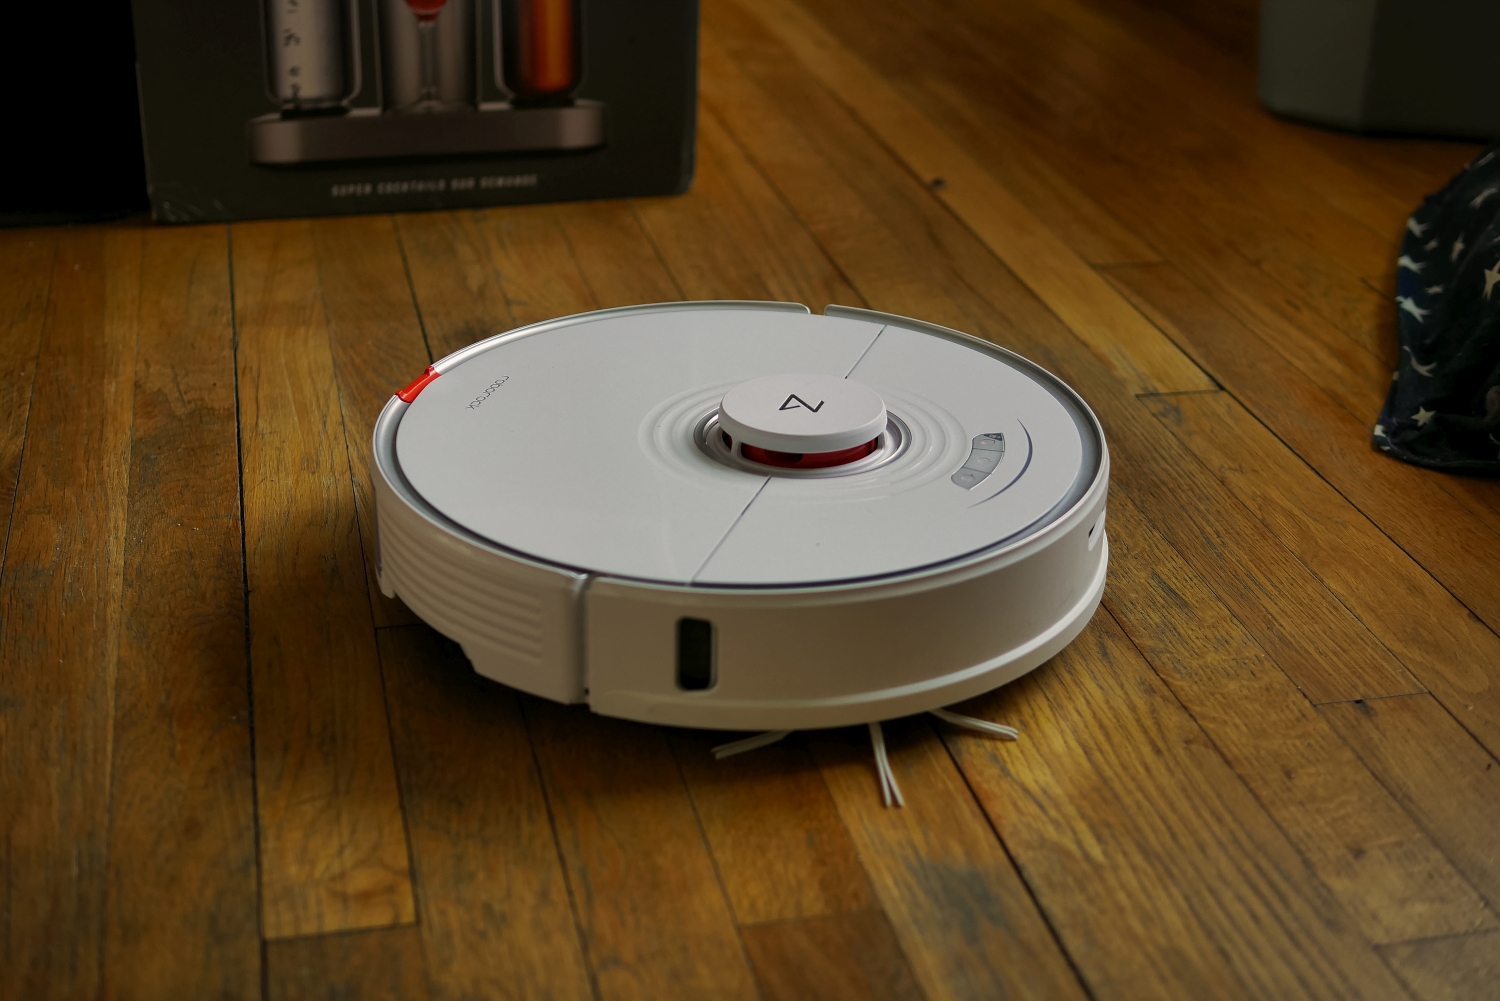 Roborock S7 Review: Finishing Up the Cleaning at Sonic Speed